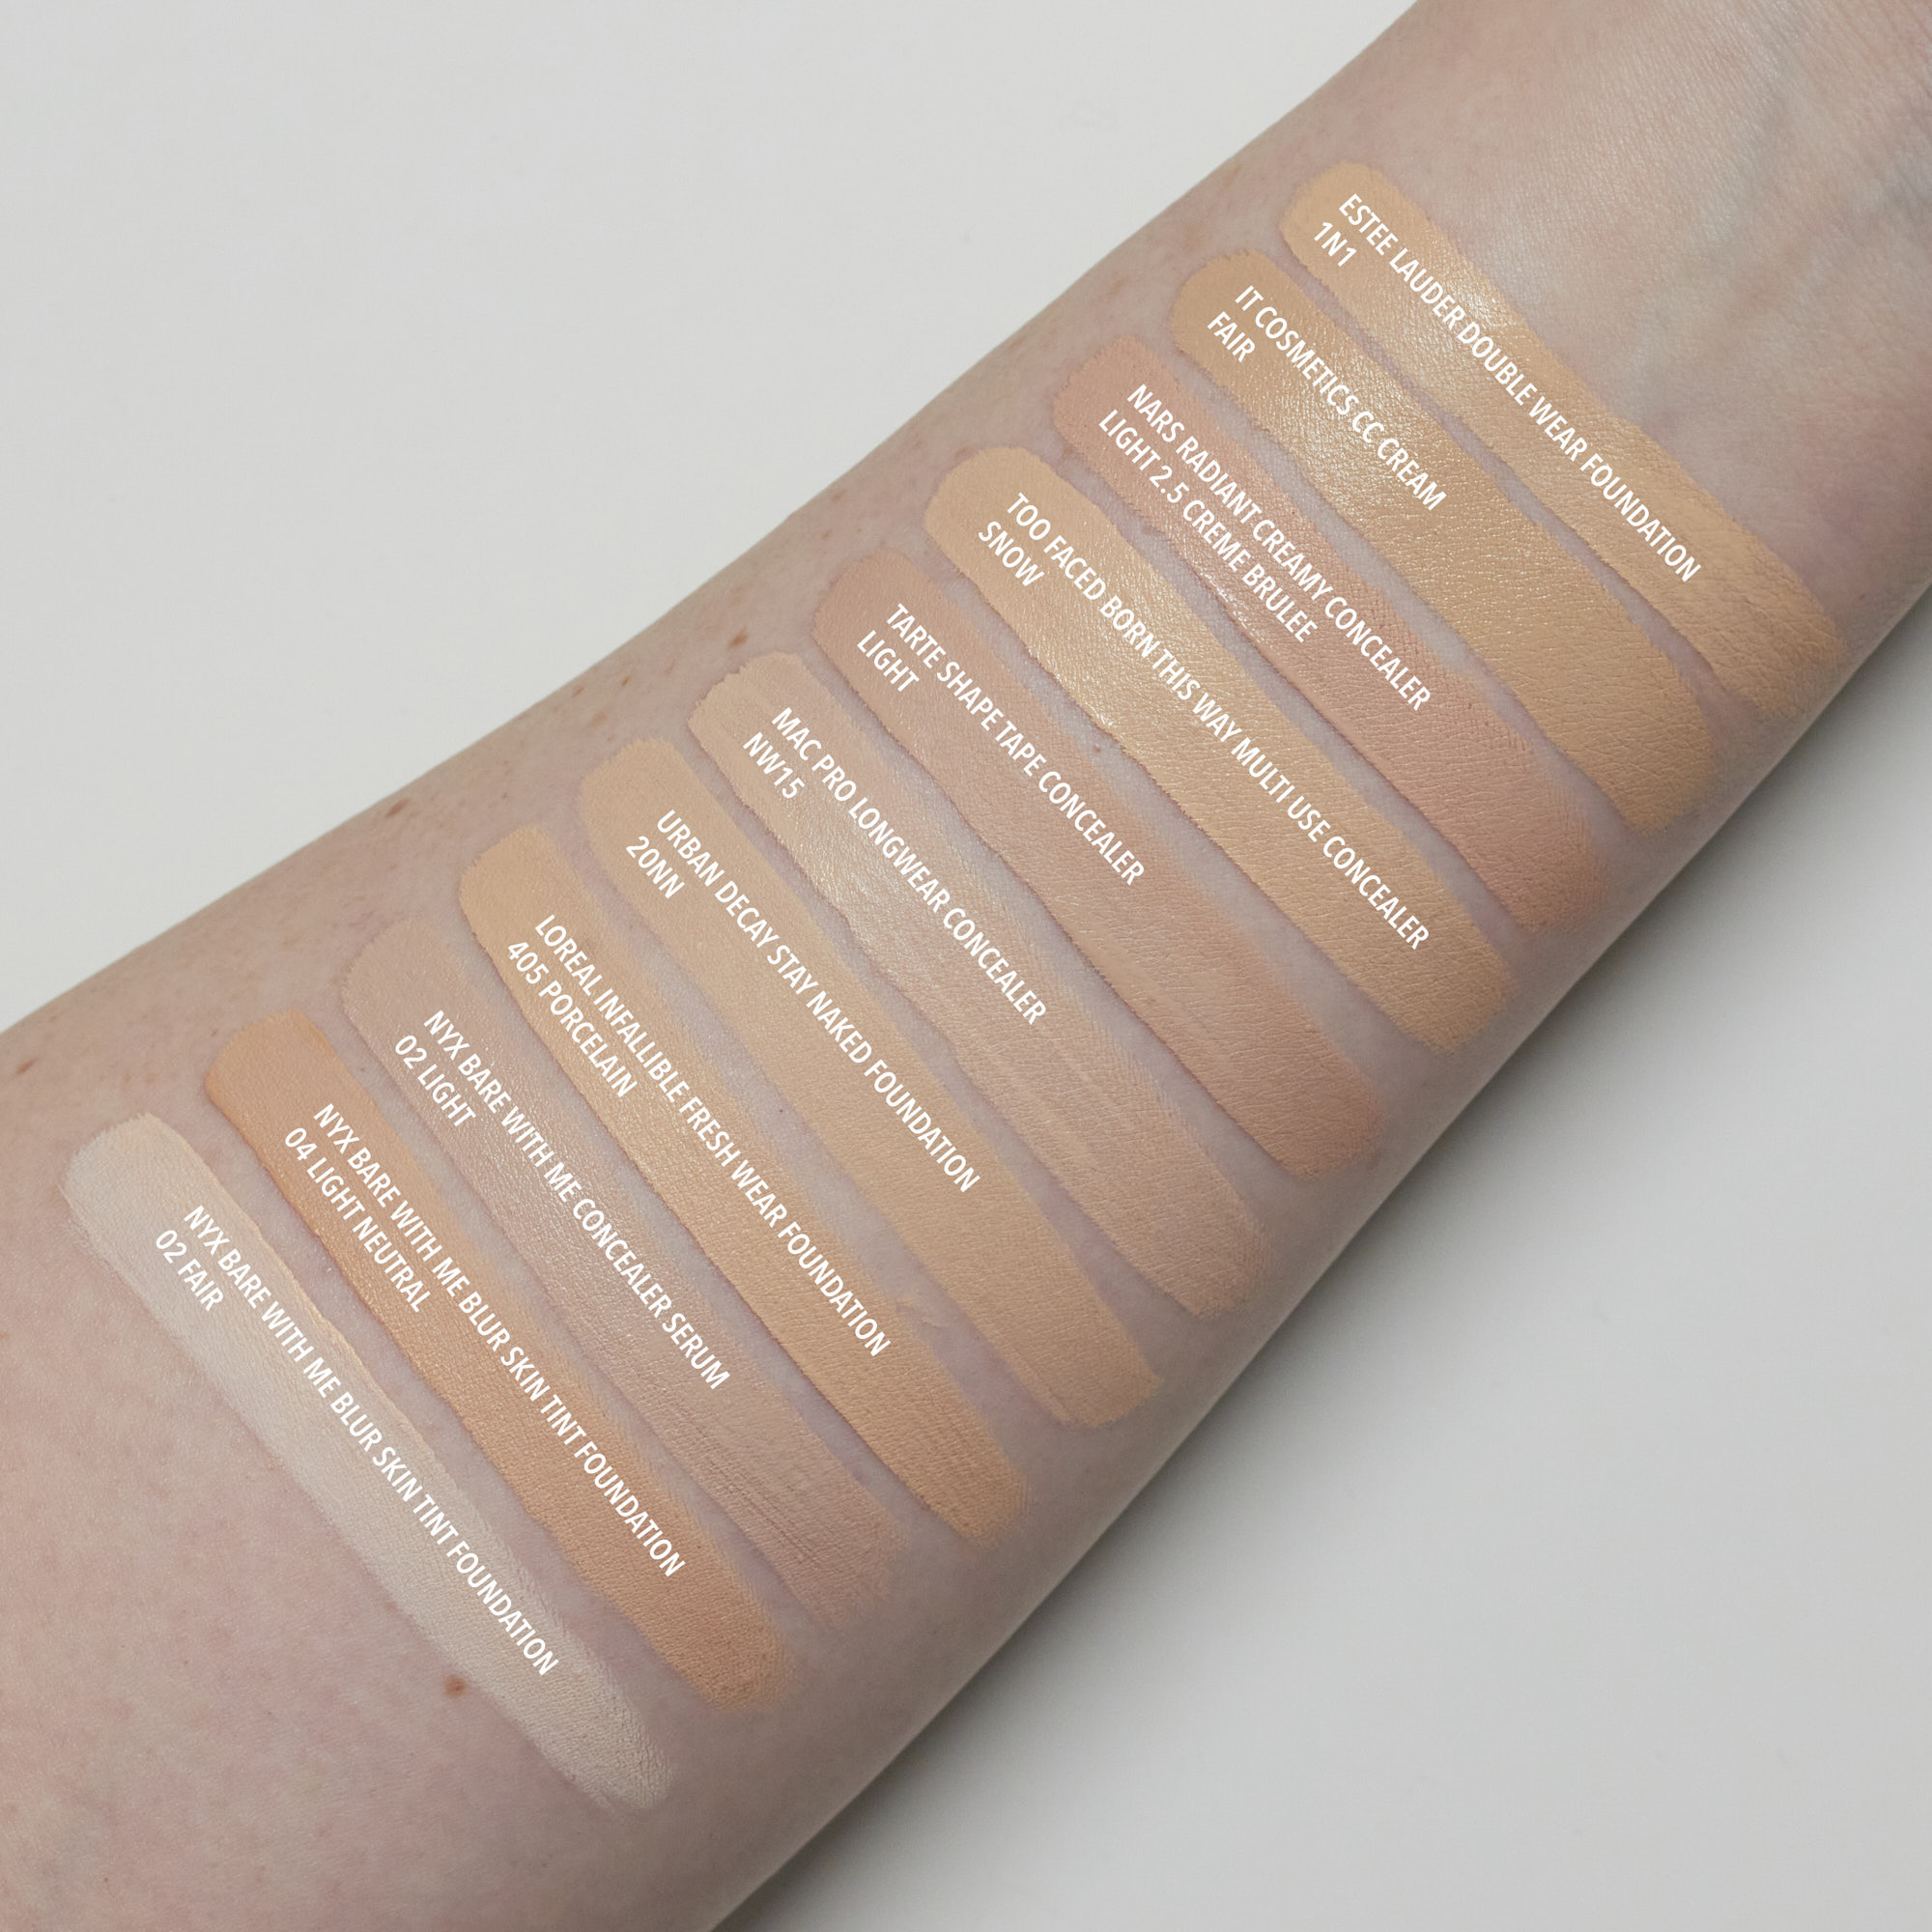 nyx blur foundation review